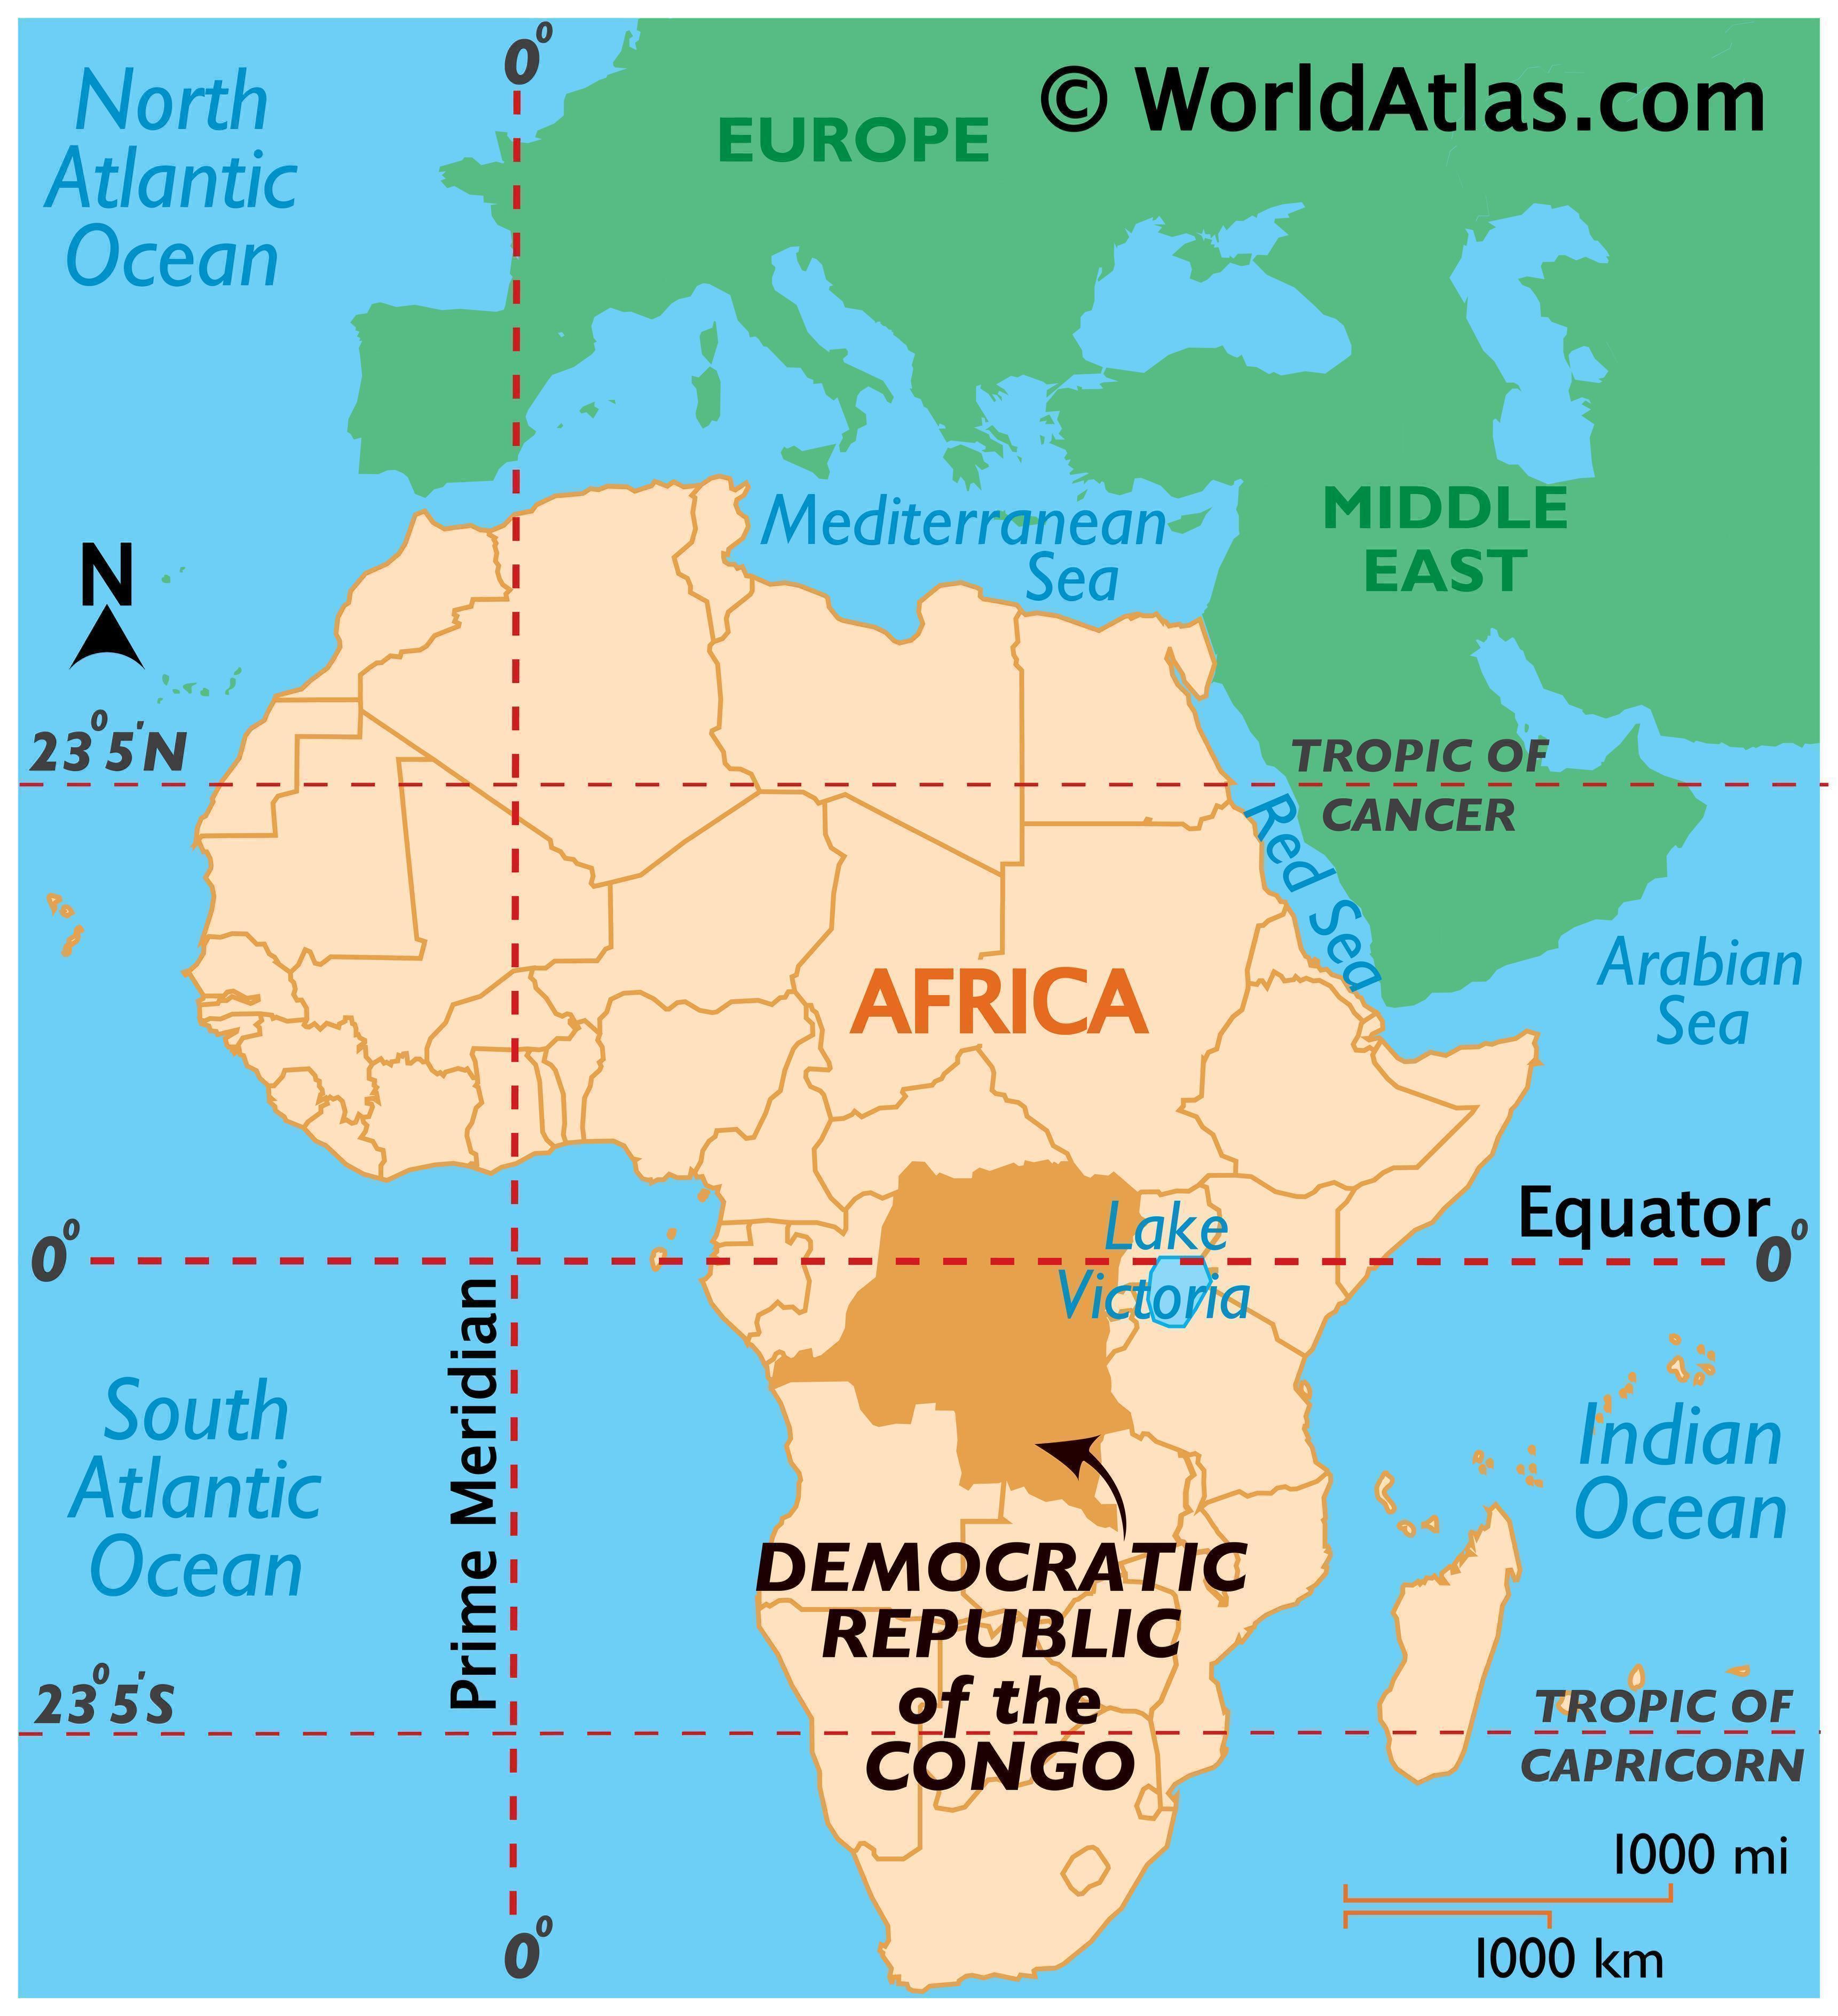 Congo In Map Of Africa Democratic Republic Of The Congo Maps & Facts - World Atlas